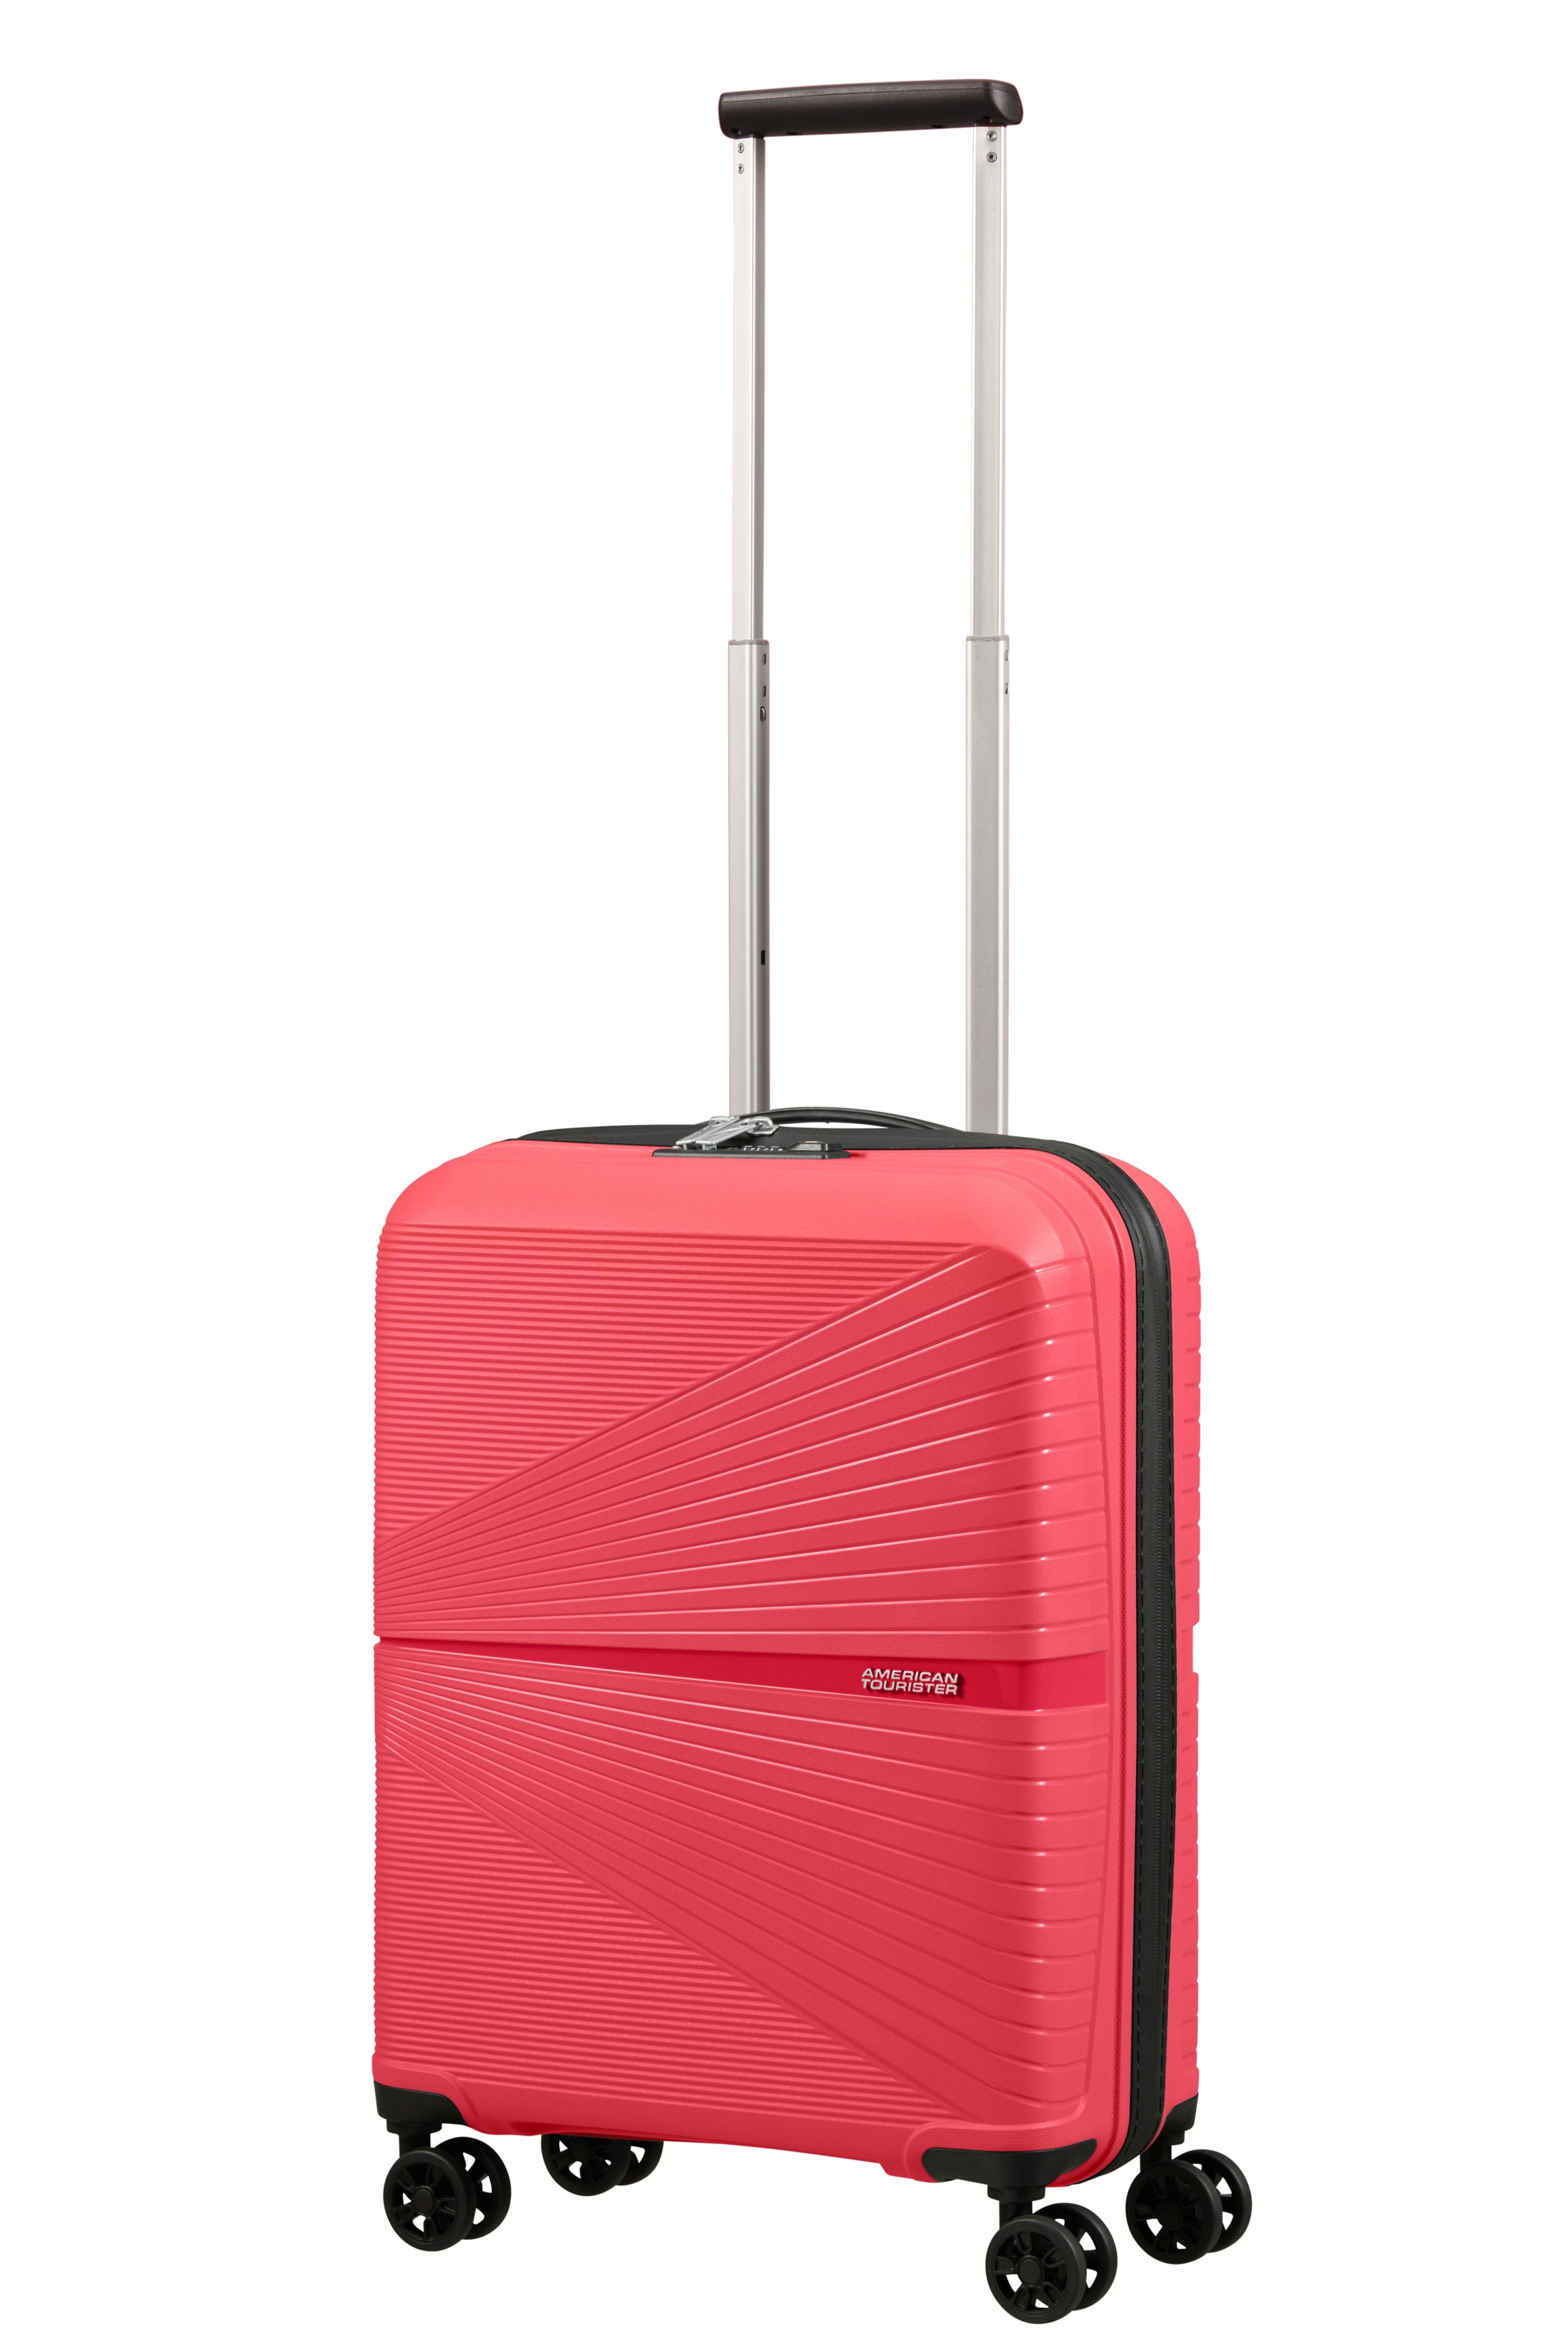 American Tourister - Airconic 55cm Small 4 Wheel Hard Suitcase - Paradise Pink-1